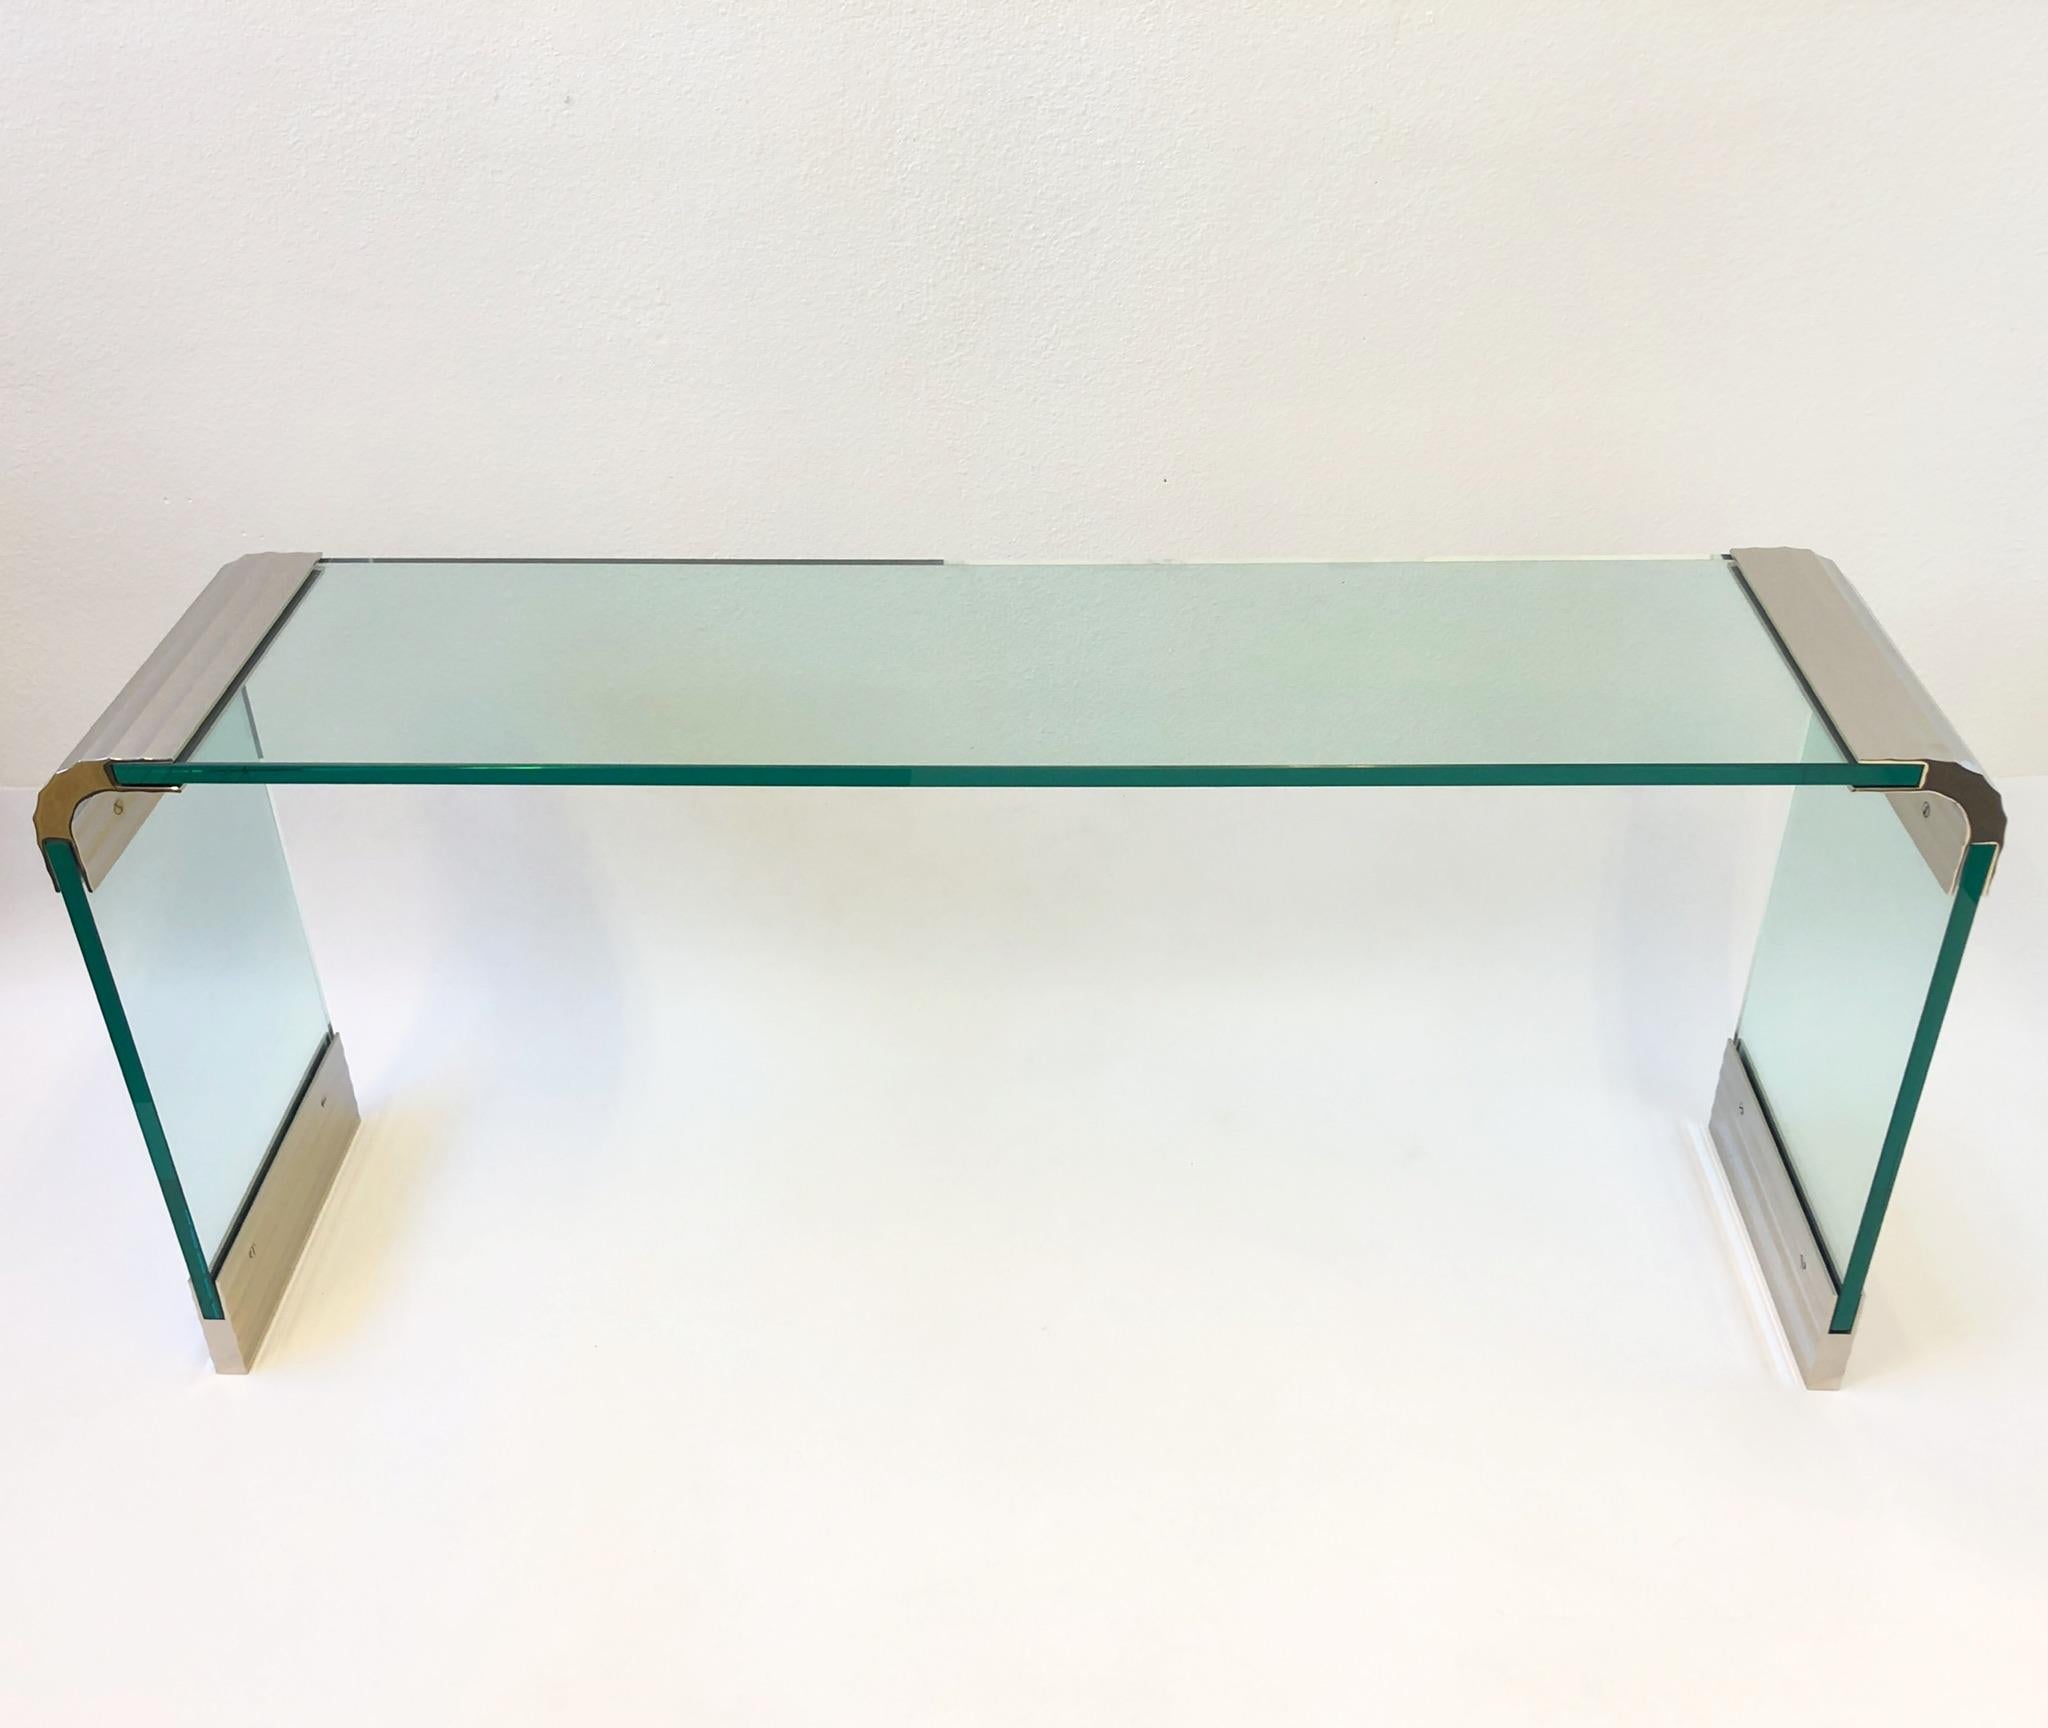 Scalloped Nickel and Glass Waterfall Console Table by Leon Rosen for Pace 1